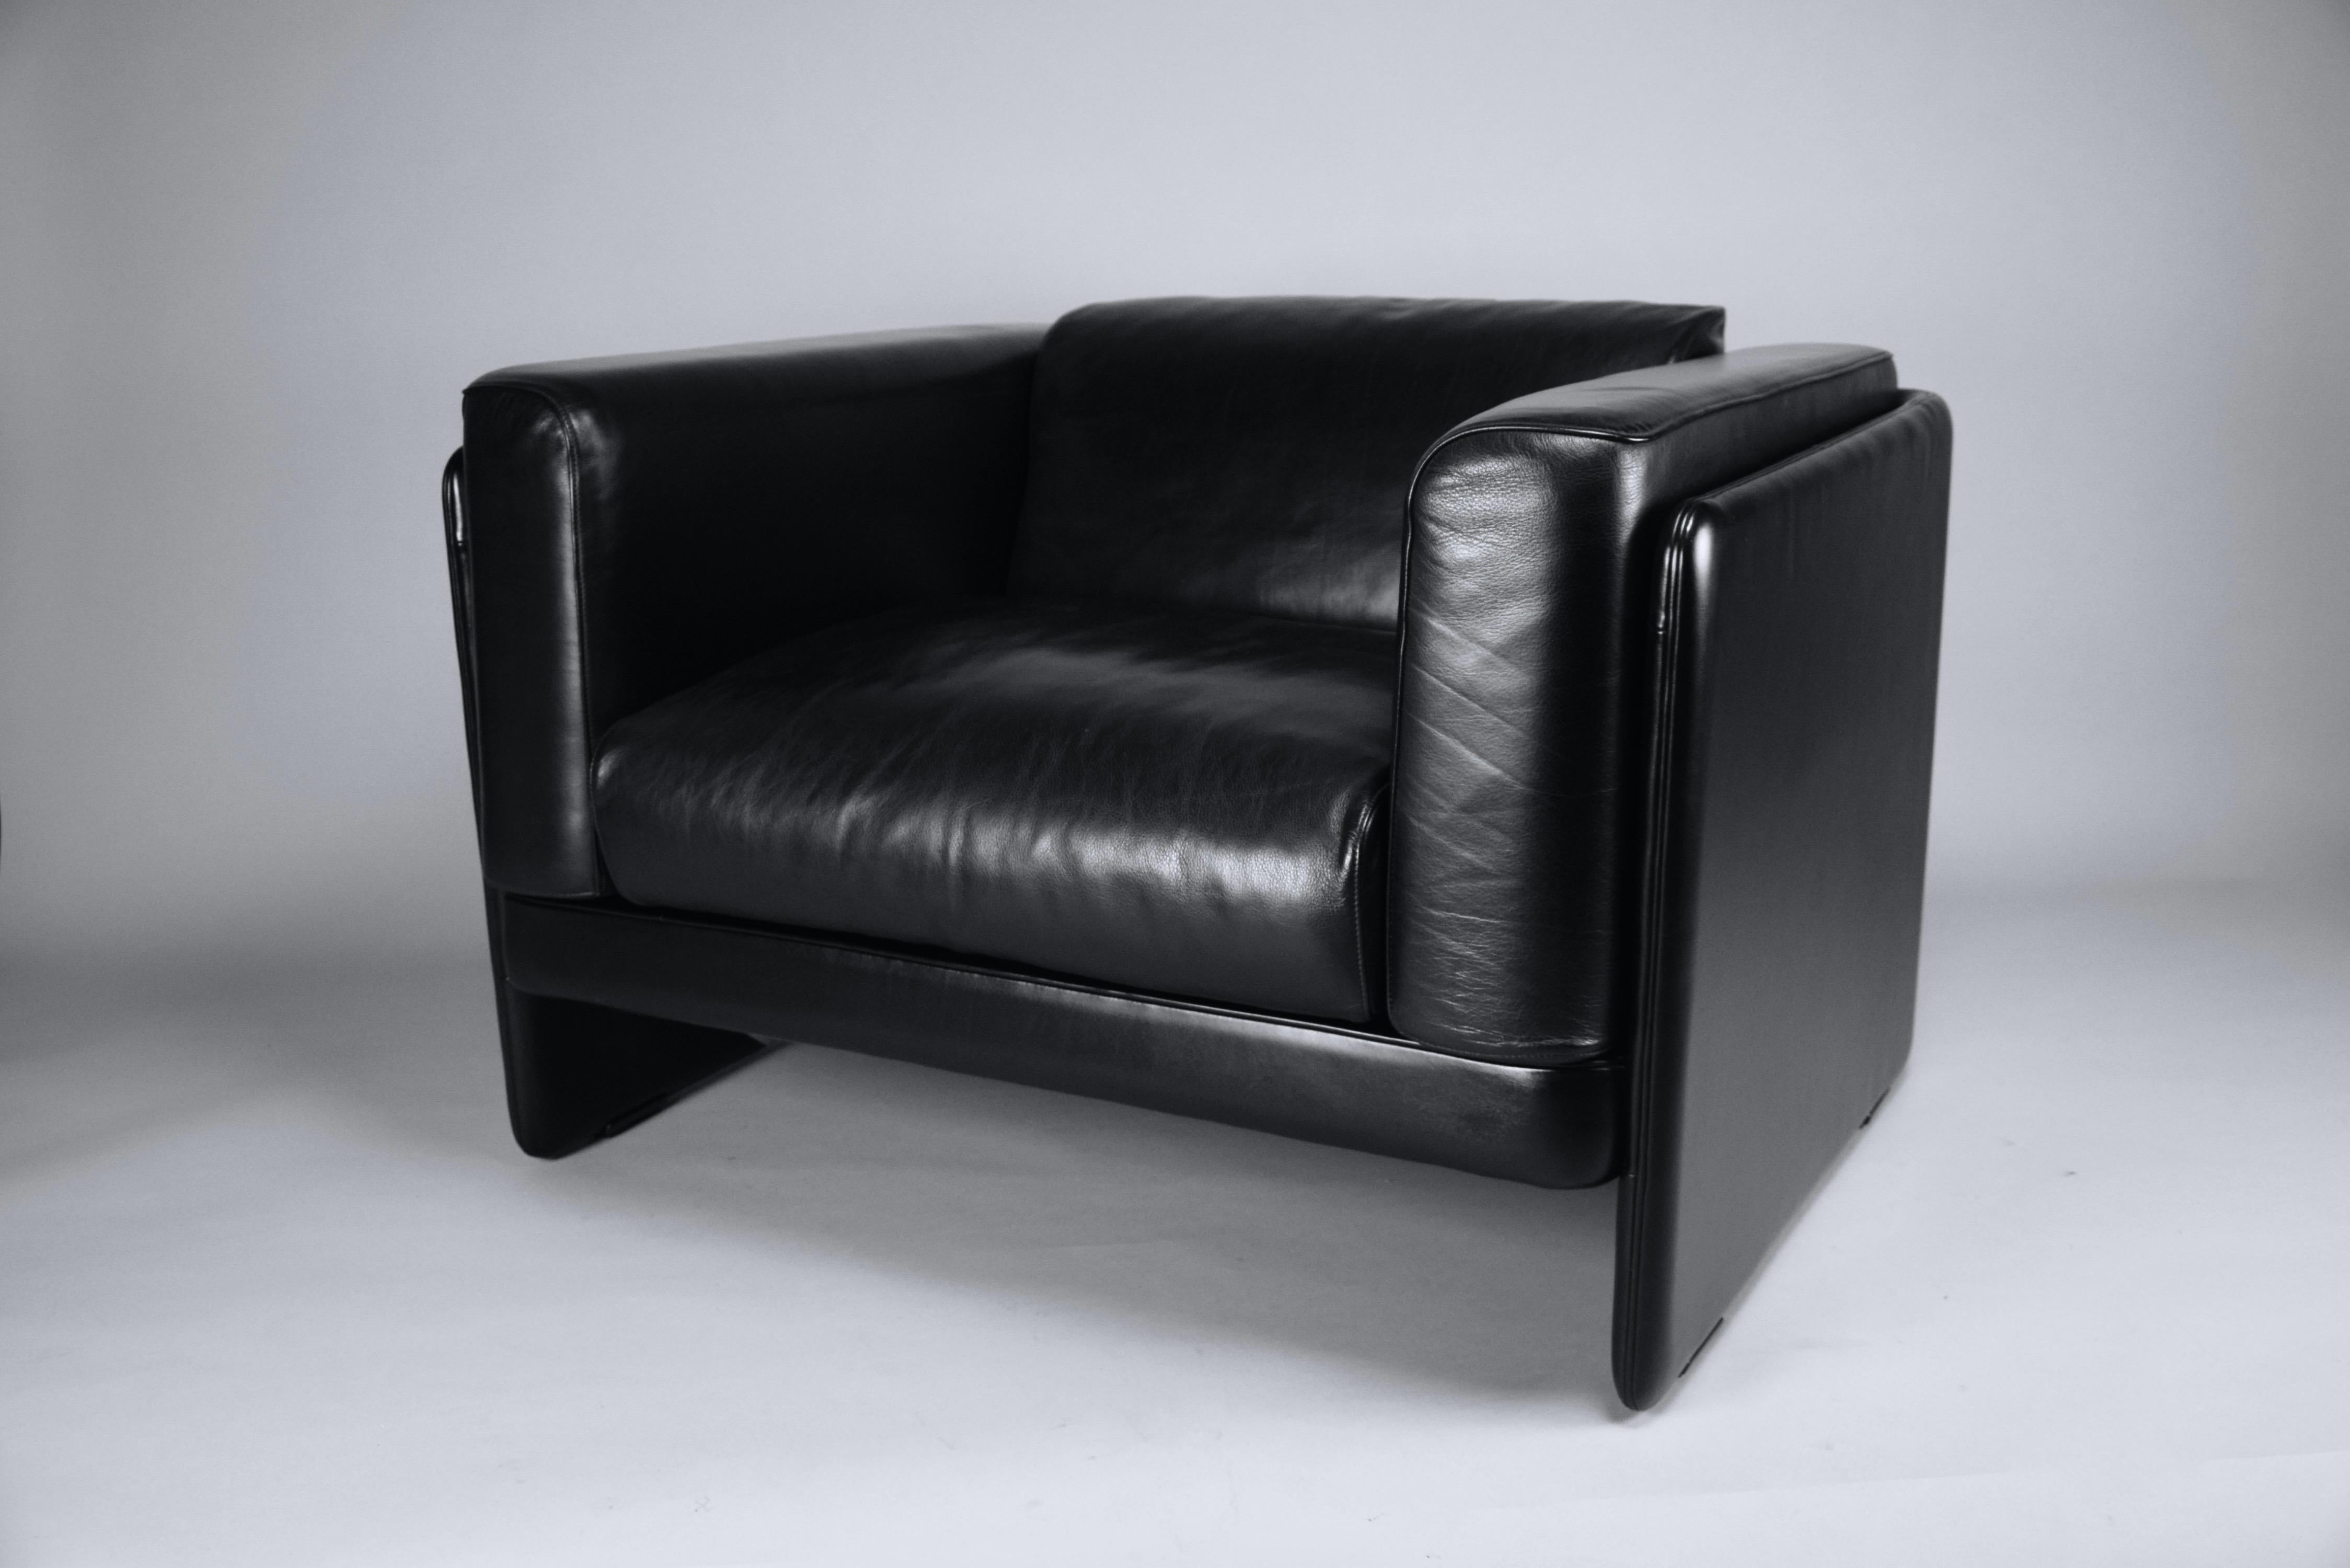 Introducing Timeless Elegance: Tito Agnoli's 1980s Black Leather Armchair Le Capanelle by Poltrona Frau

Indulge in the epitome of style and comfort with the exquisite black leather armchair designed by Tito Agnoli in the 1980s, meticulously crafted